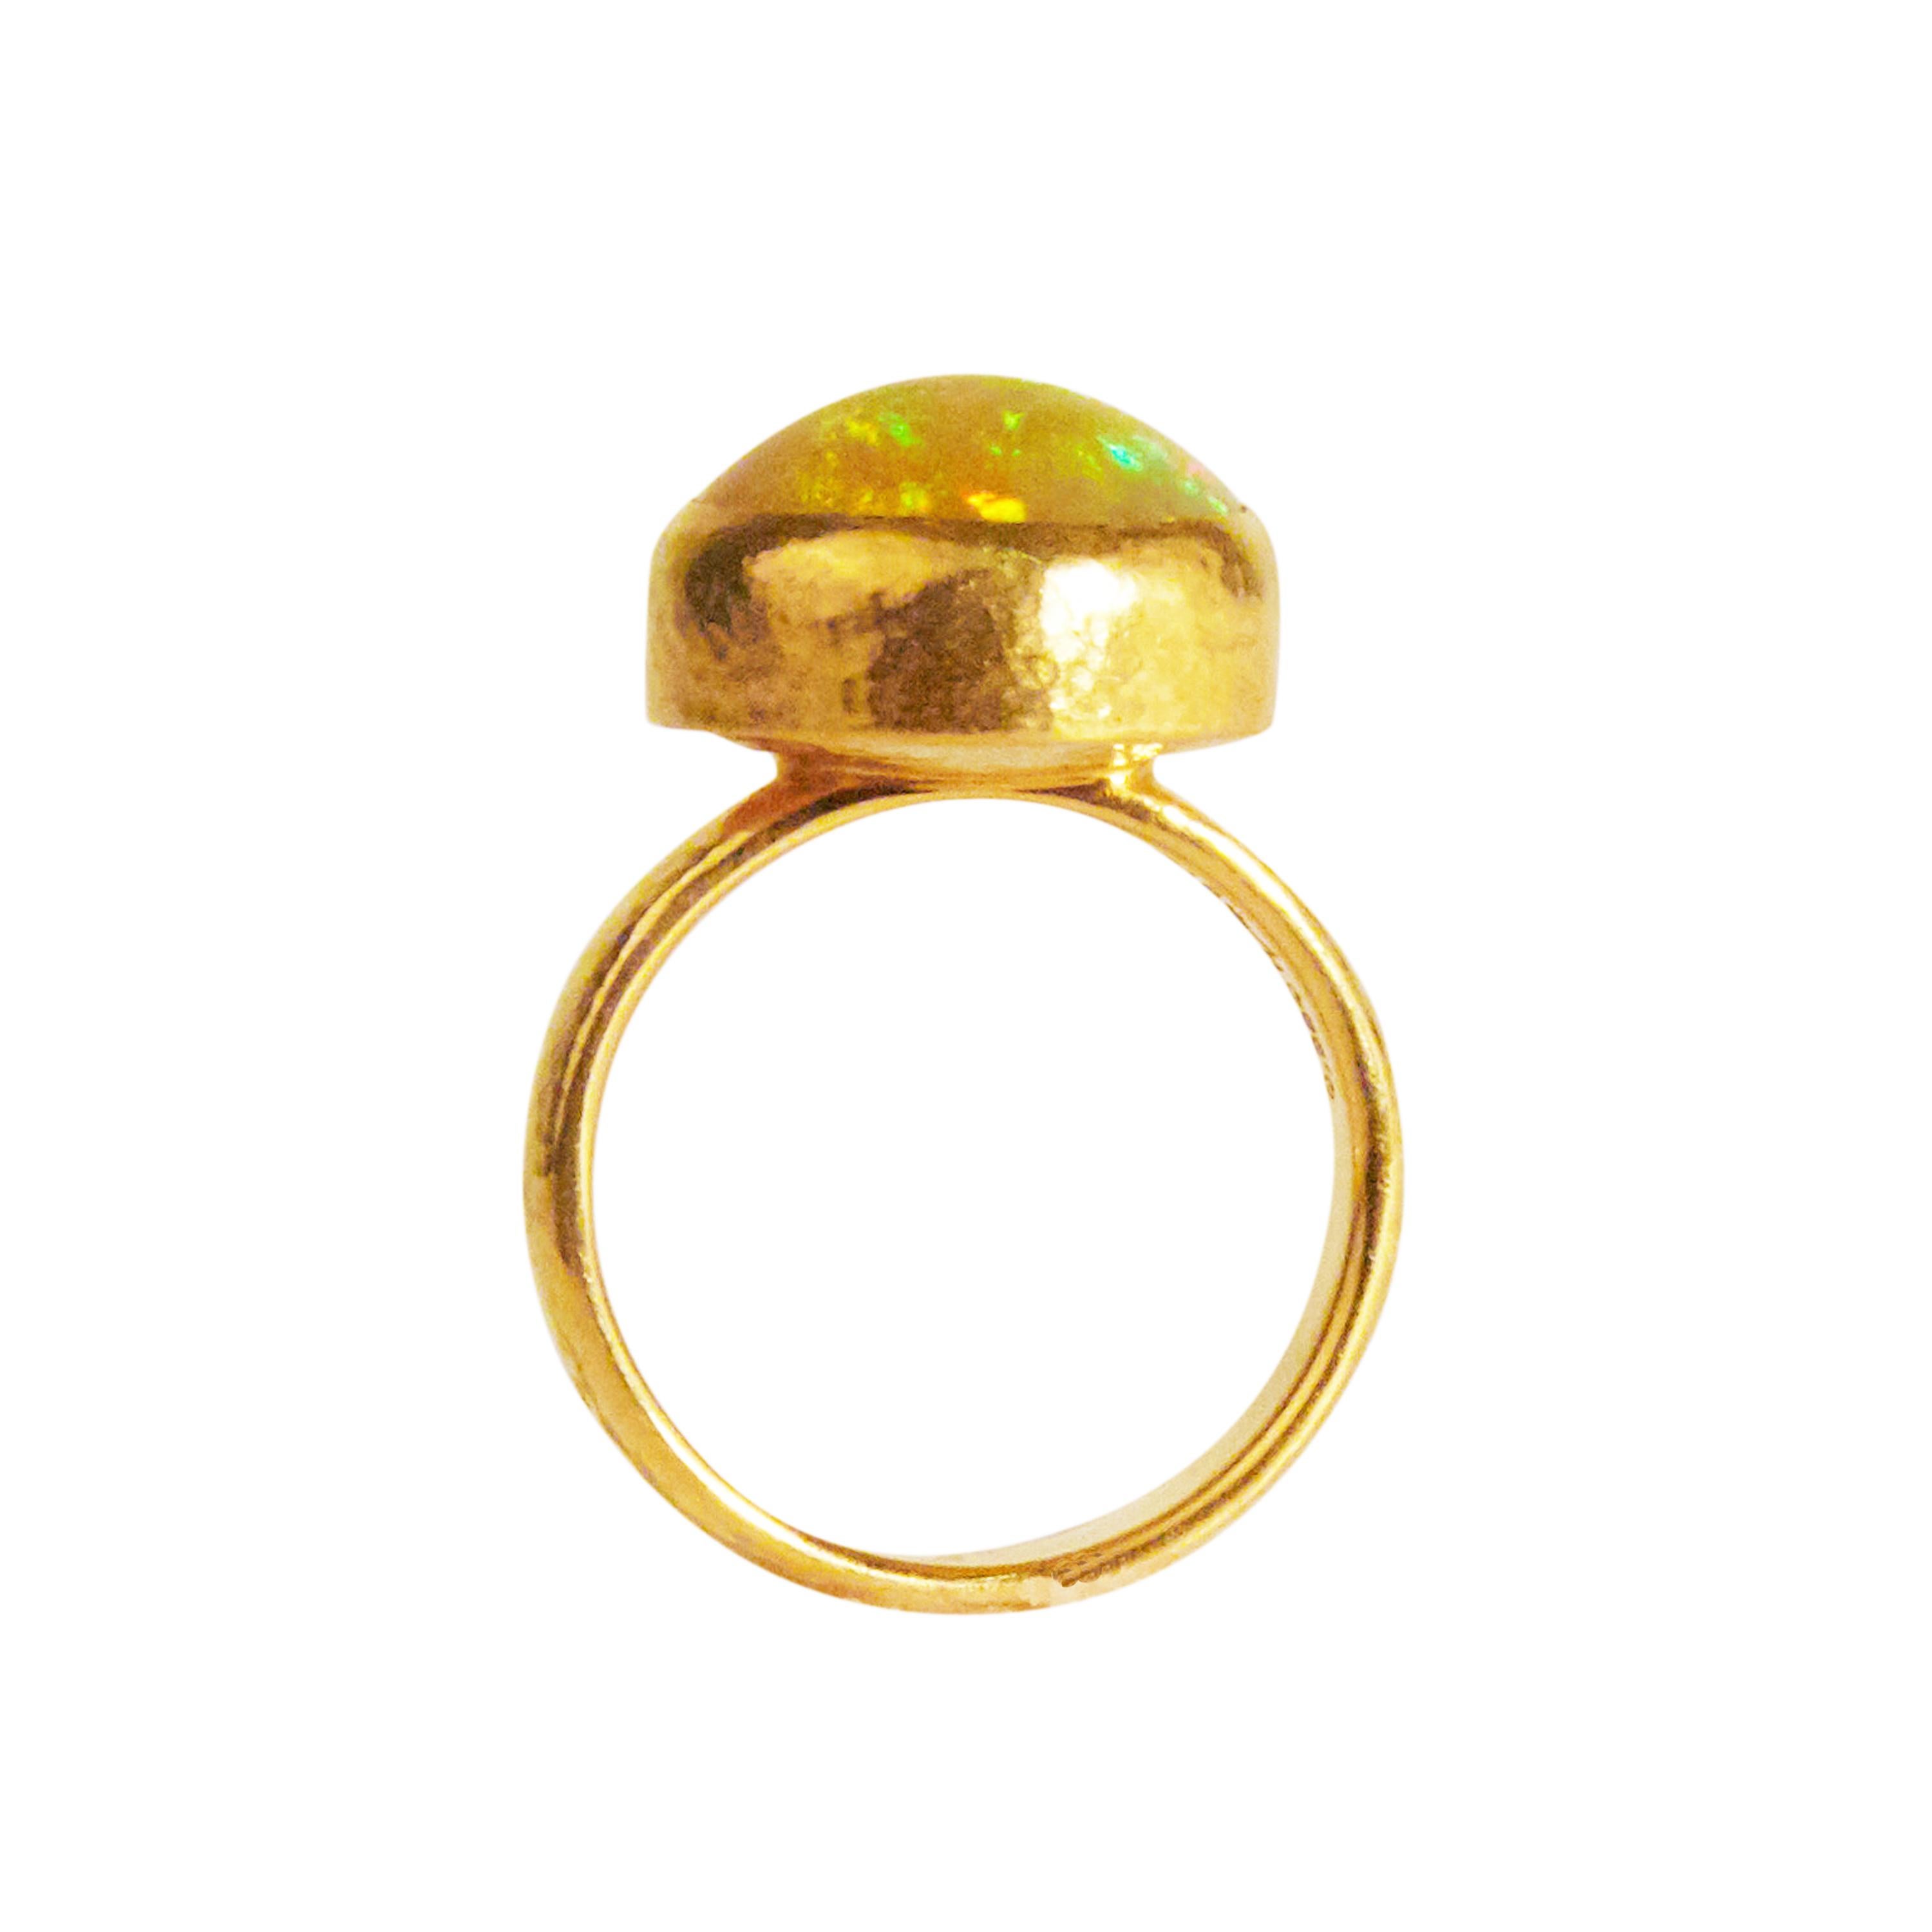 Contemporary GURHAN 22-24 Karat Hammered Yellow Gold Cabochon Ethiopian Opal Cocktail Ring For Sale